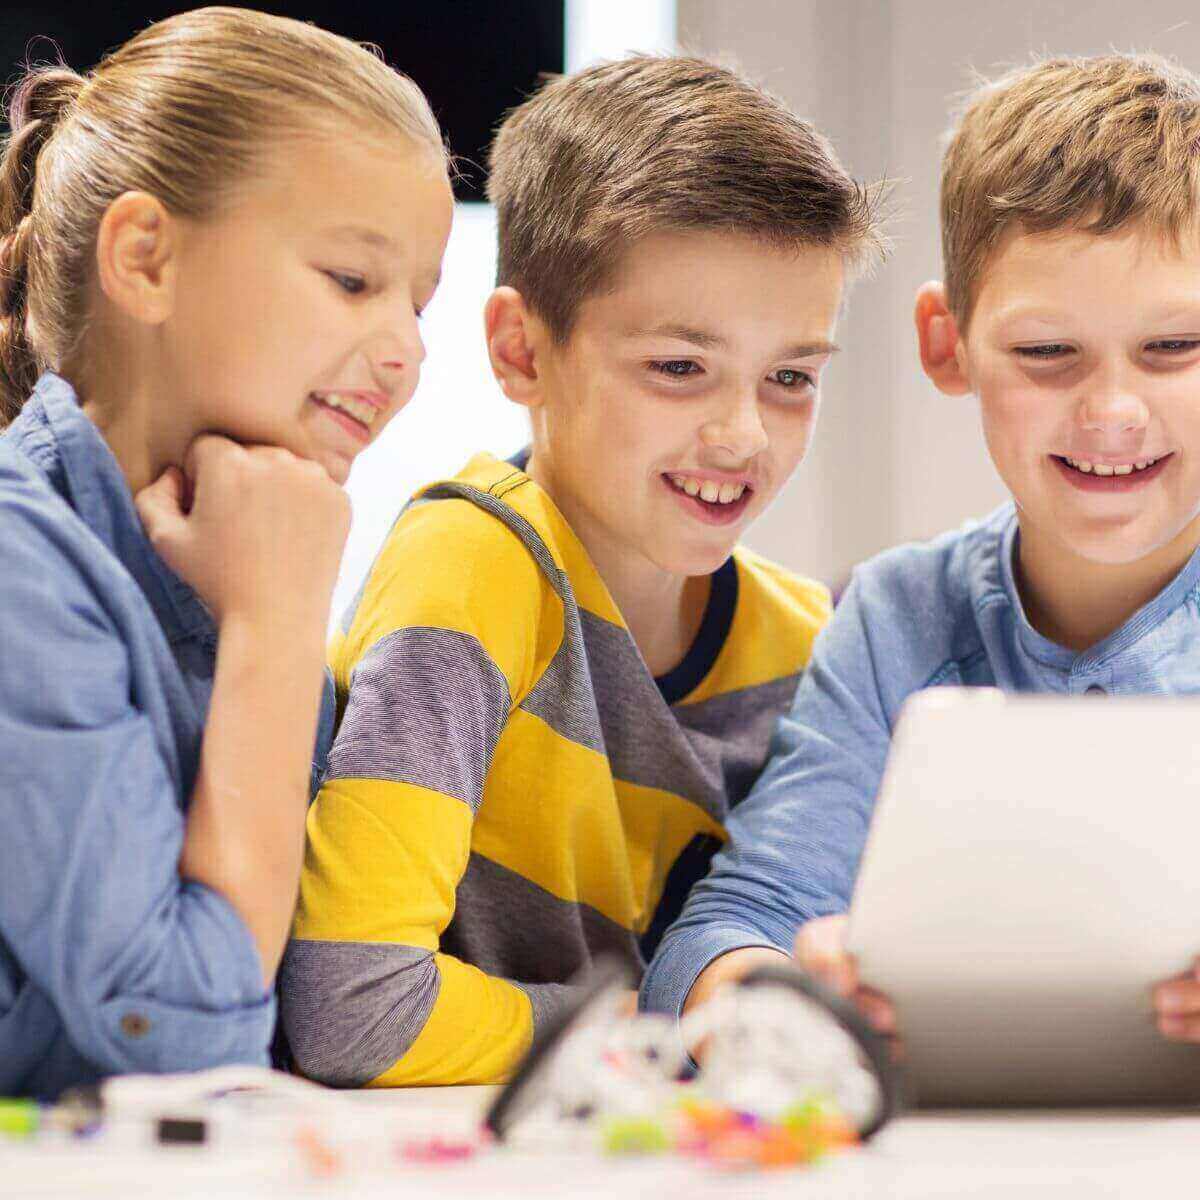 Two boys and a girl are standing at a table watching a tablet and smiling.